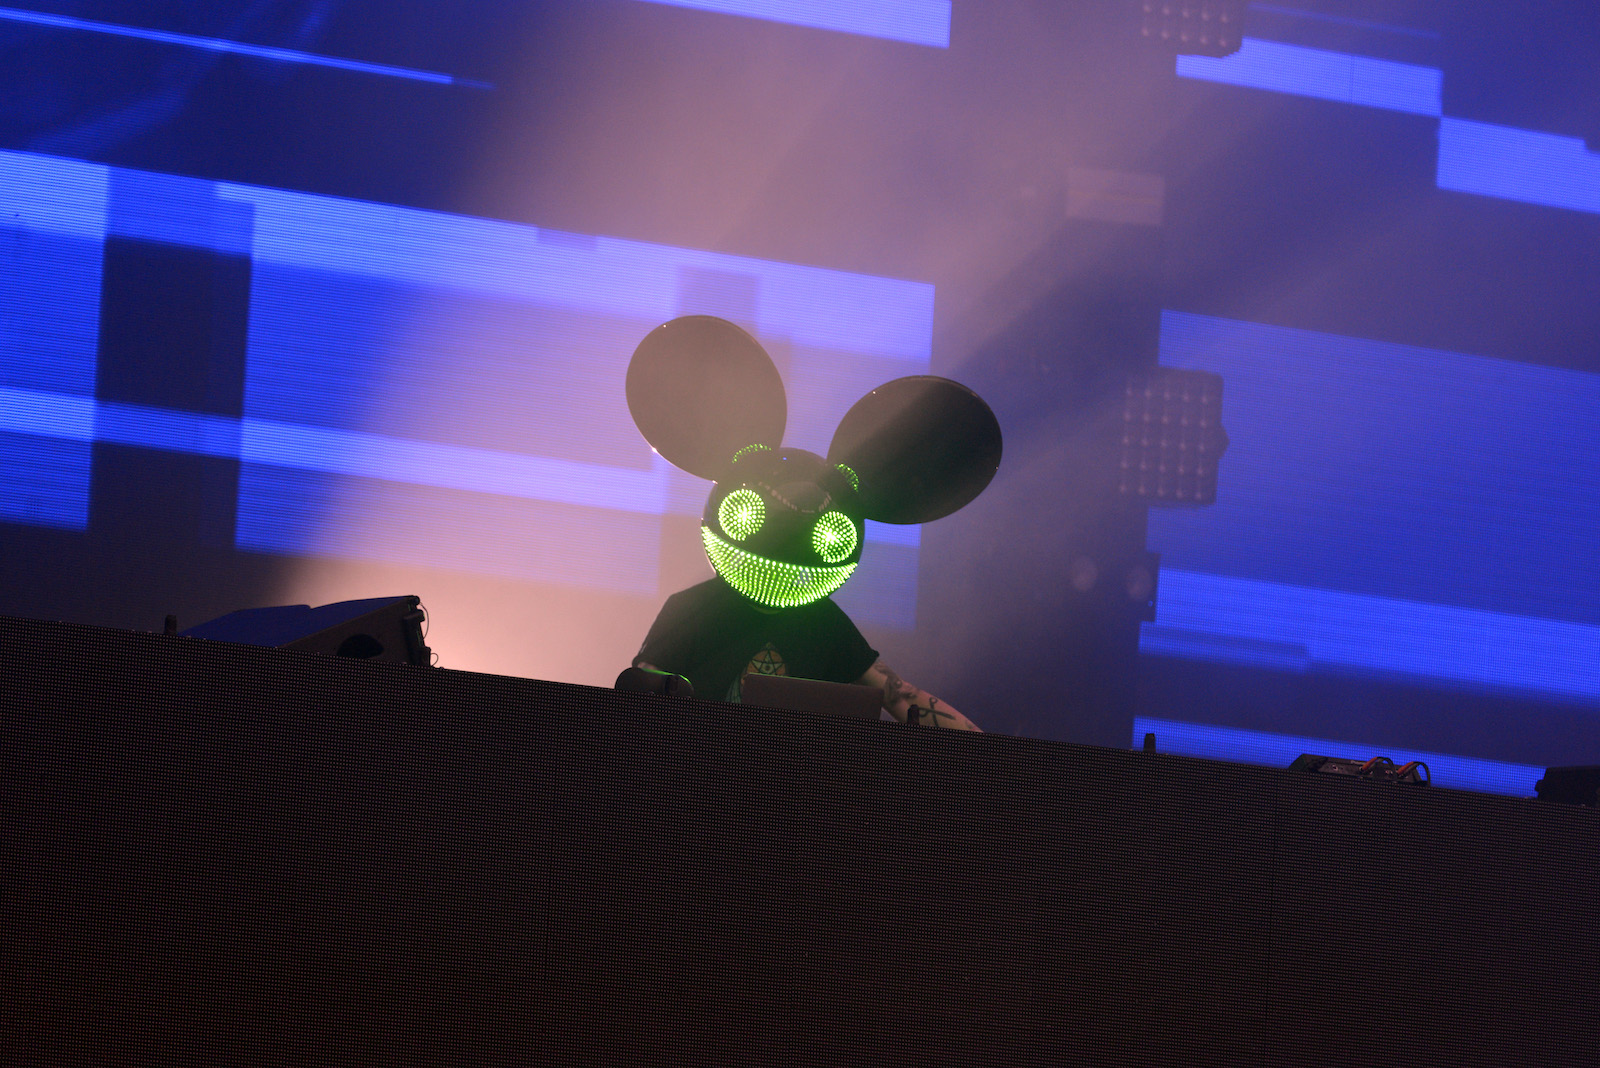 Decentraland music festival shows web3’s influence on the music industry